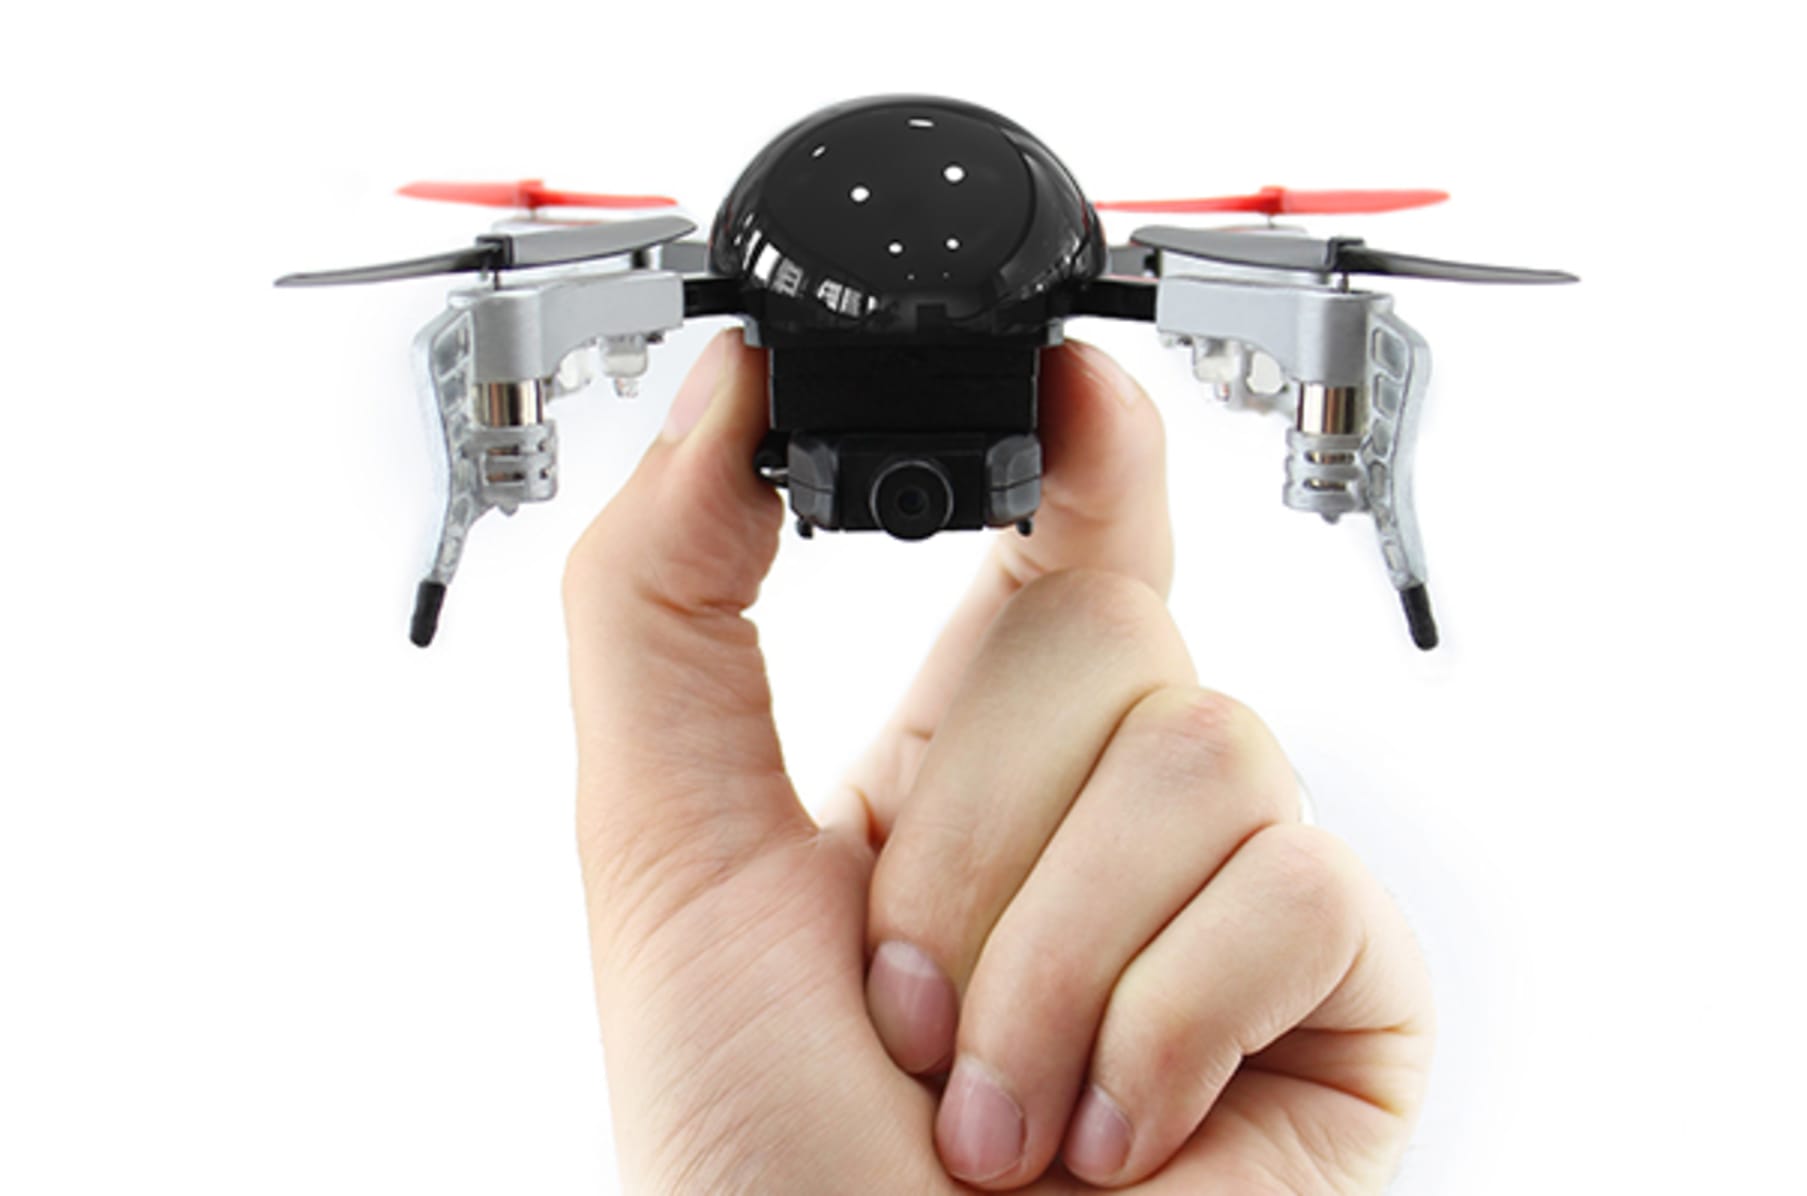 Sloppy Choose Tactile sense Micro Drone 3.0: Flight in the Palm of Your Hand | Indiegogo